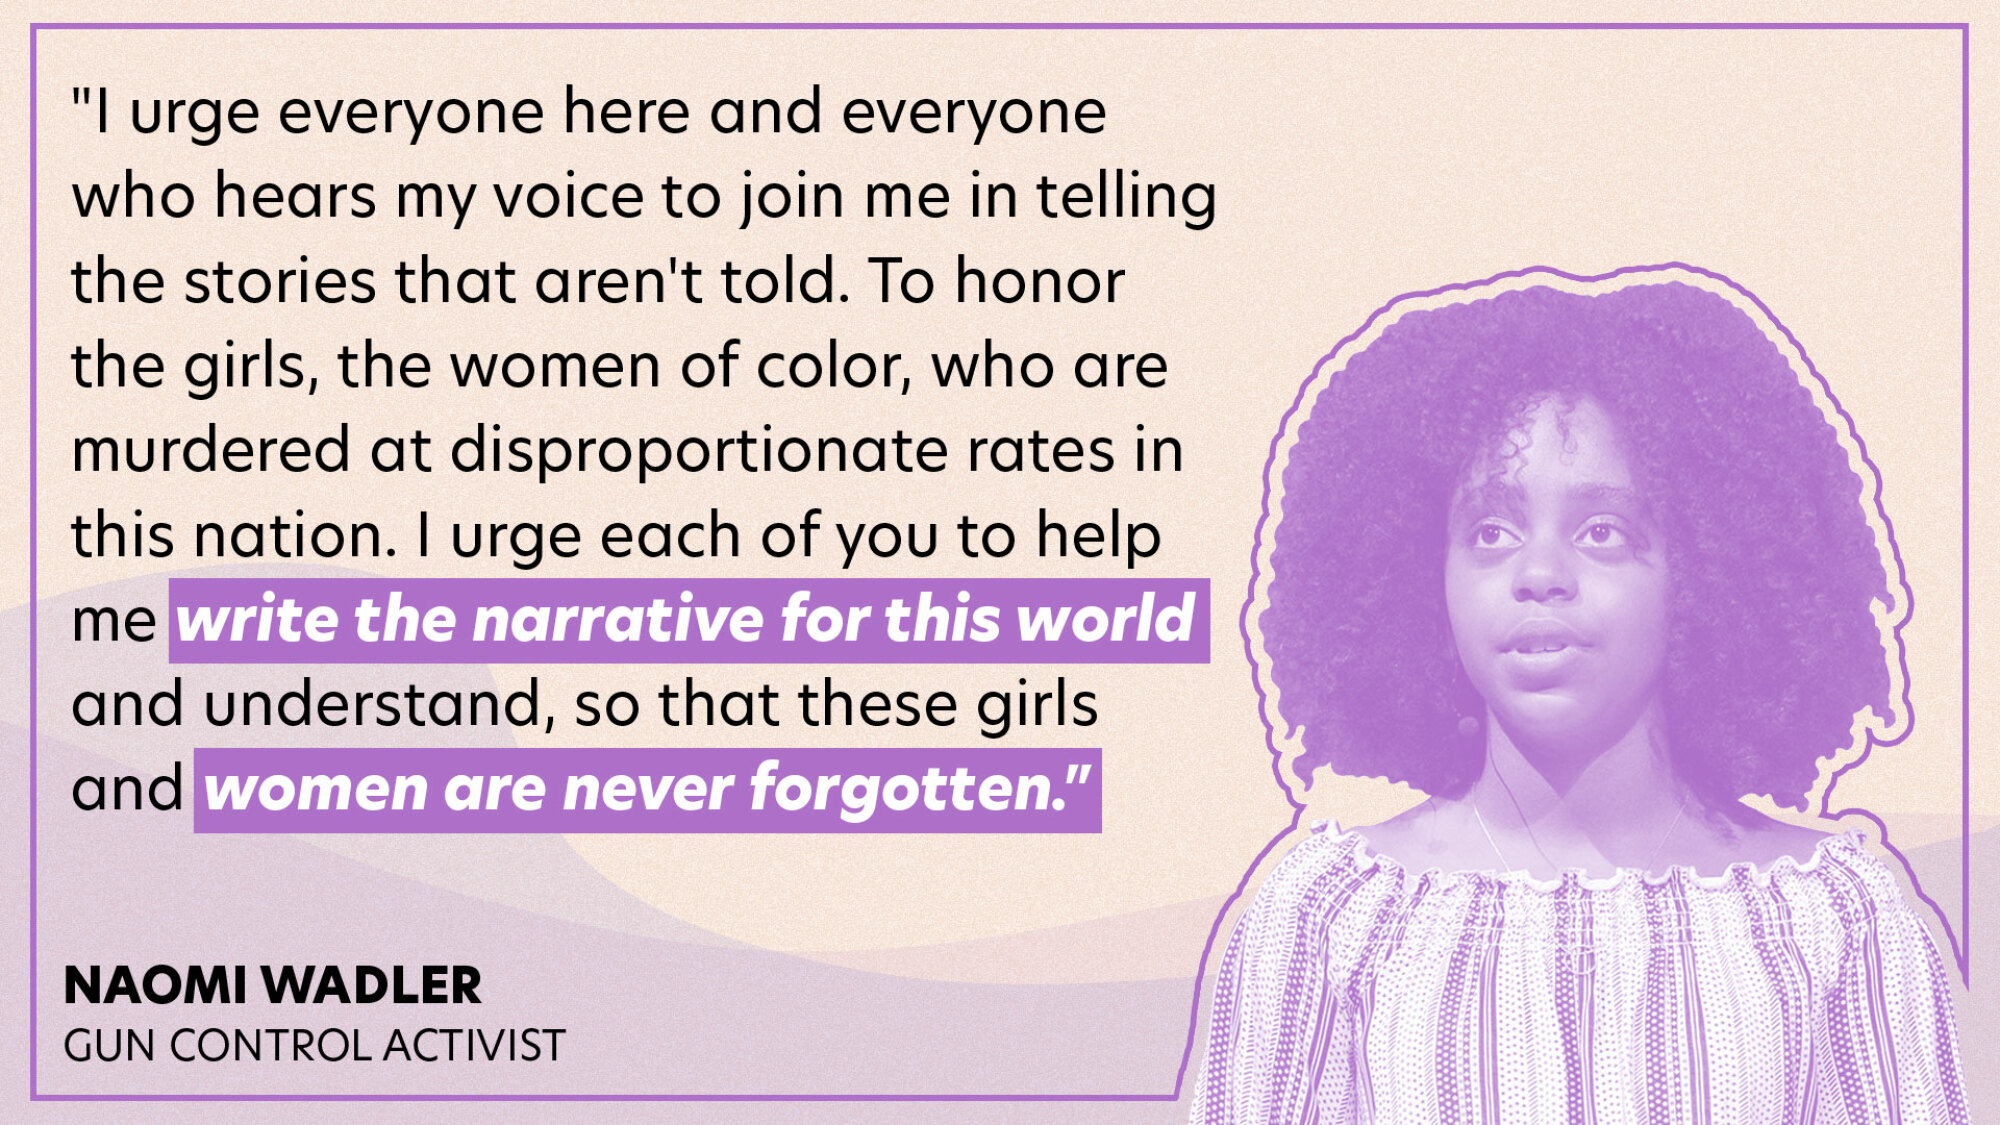 "I urge everyone here and everyone who hears my voice to join me in telling the stories that aren't told. To honor the girls, the women of color, who are murdered at disproportionate rates in this nation. I urge each of you to help me write the narrative for this world and understand, so that these girls and women are never forgotten."